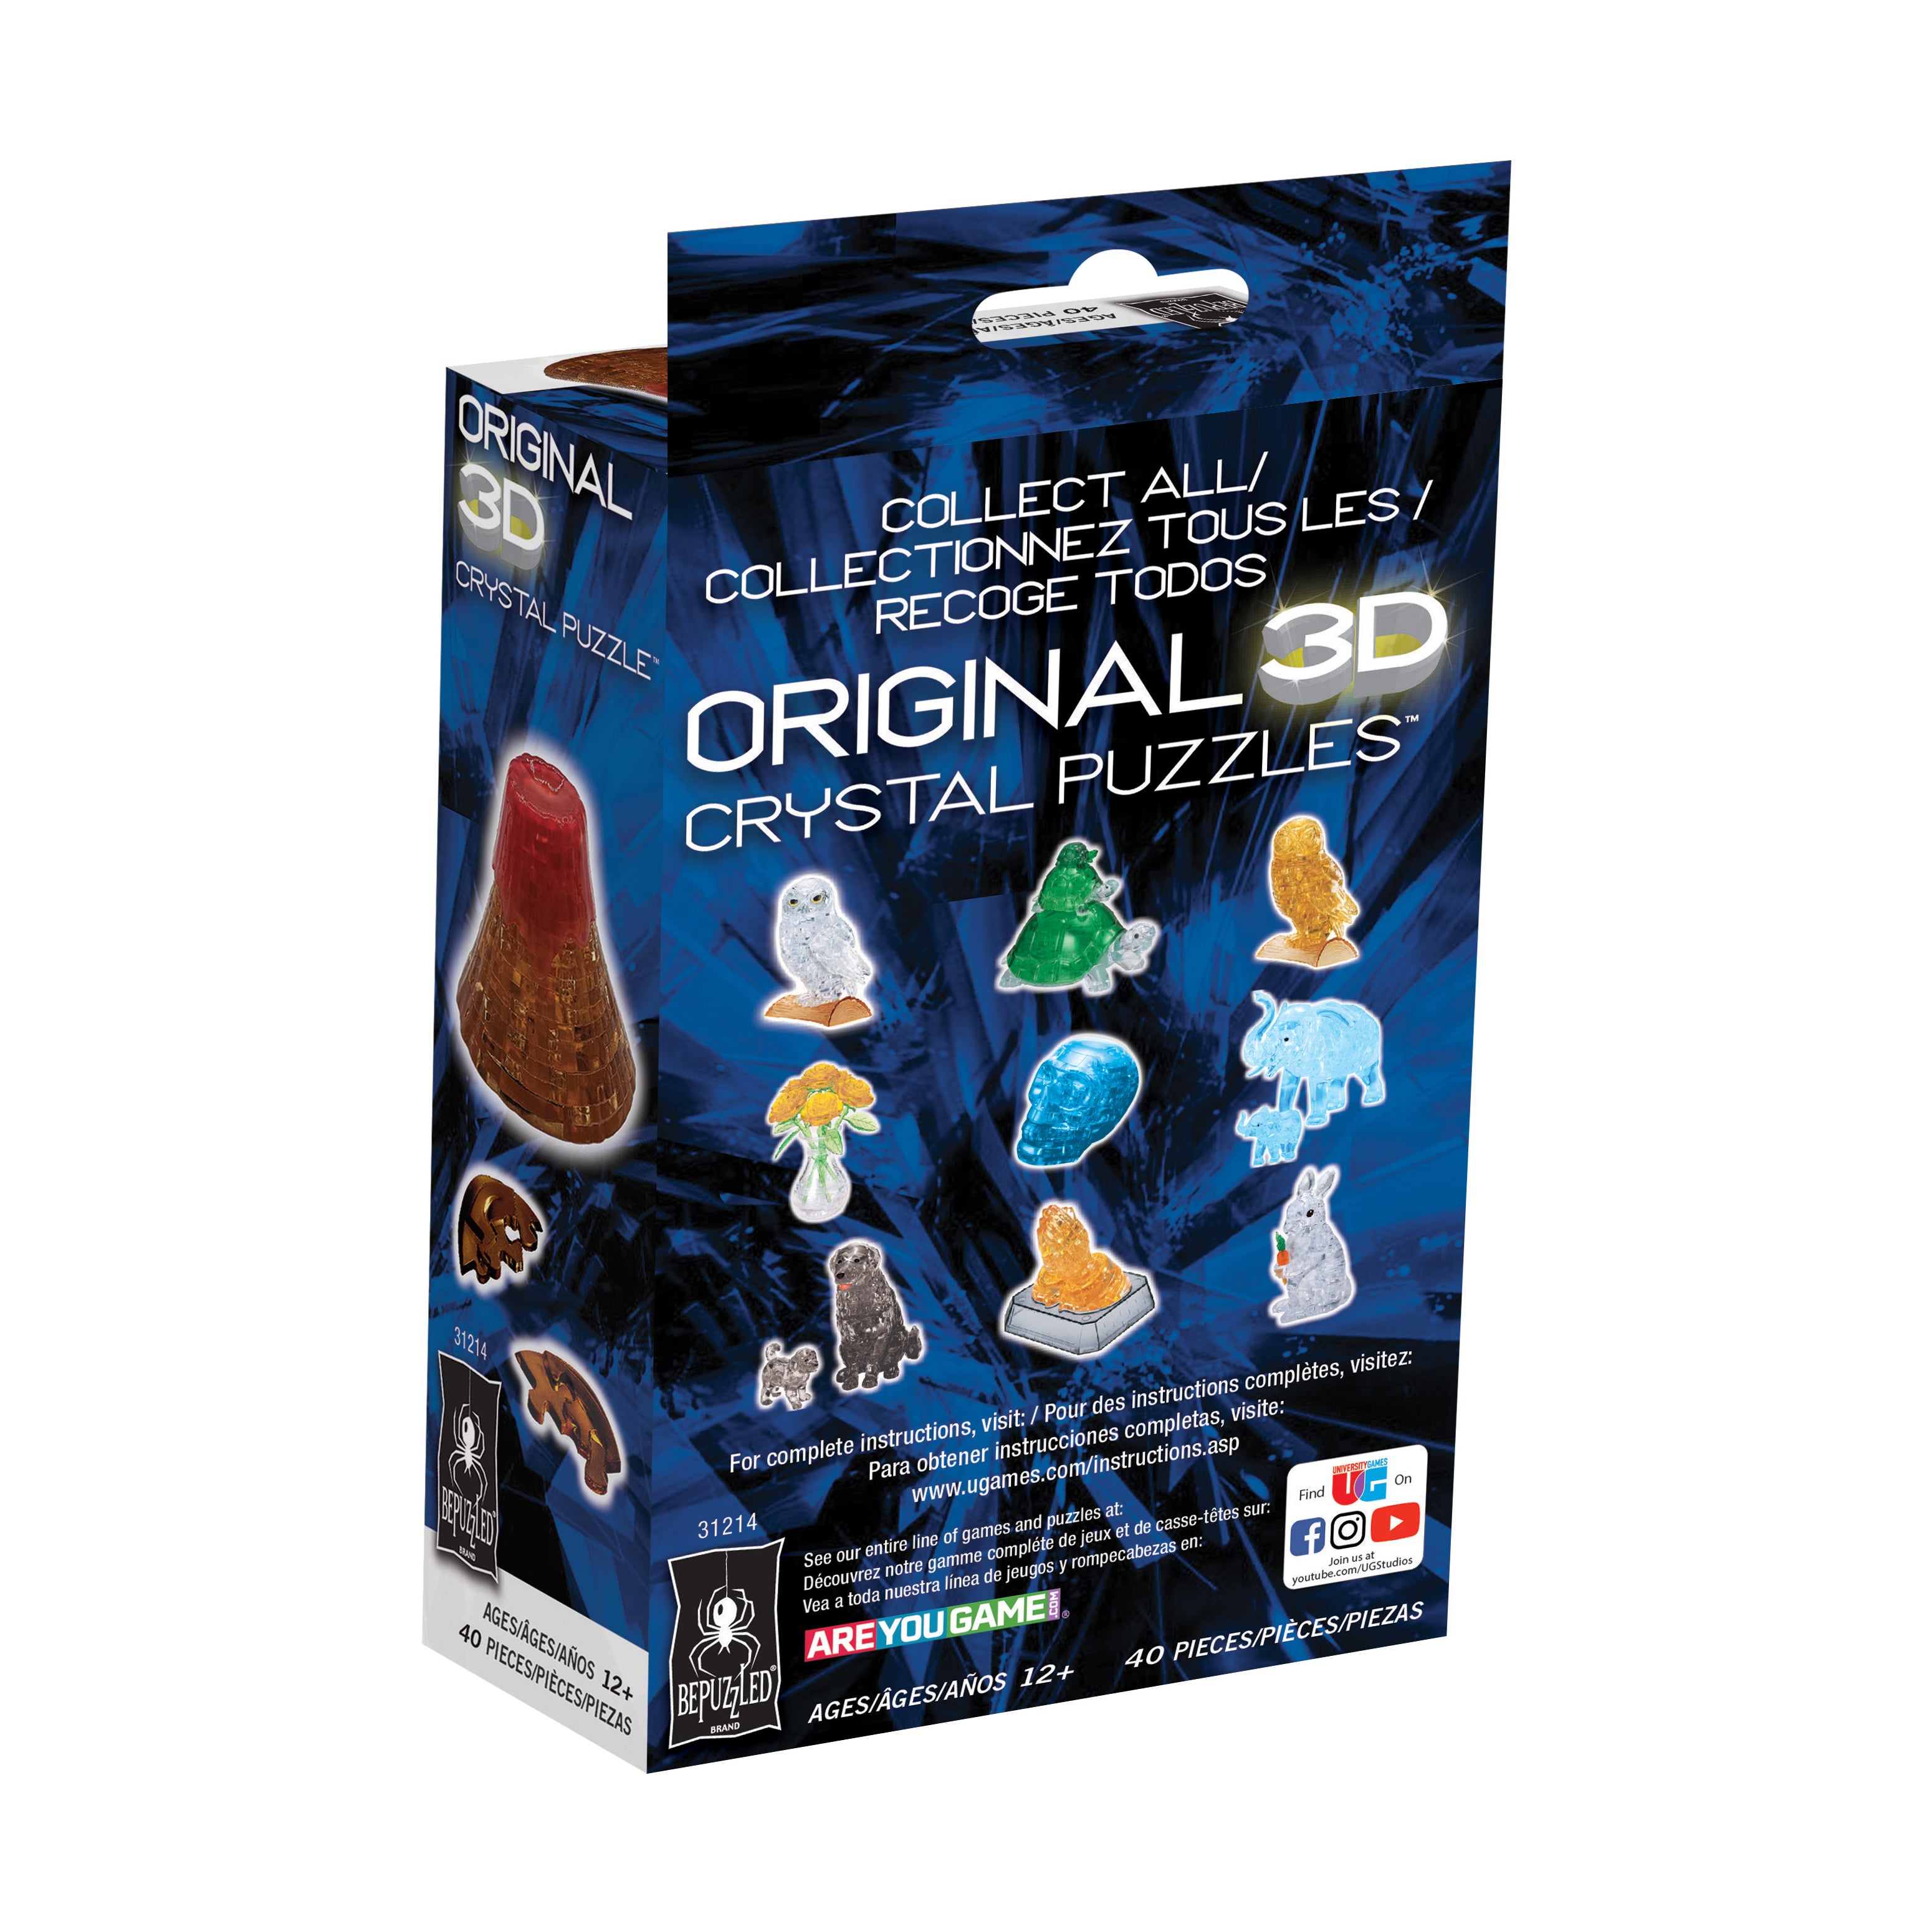 New - AreYouGame.com 3D Crystal Puzzle - Diamond: 43 Pcs - Ages 12+, 1  player